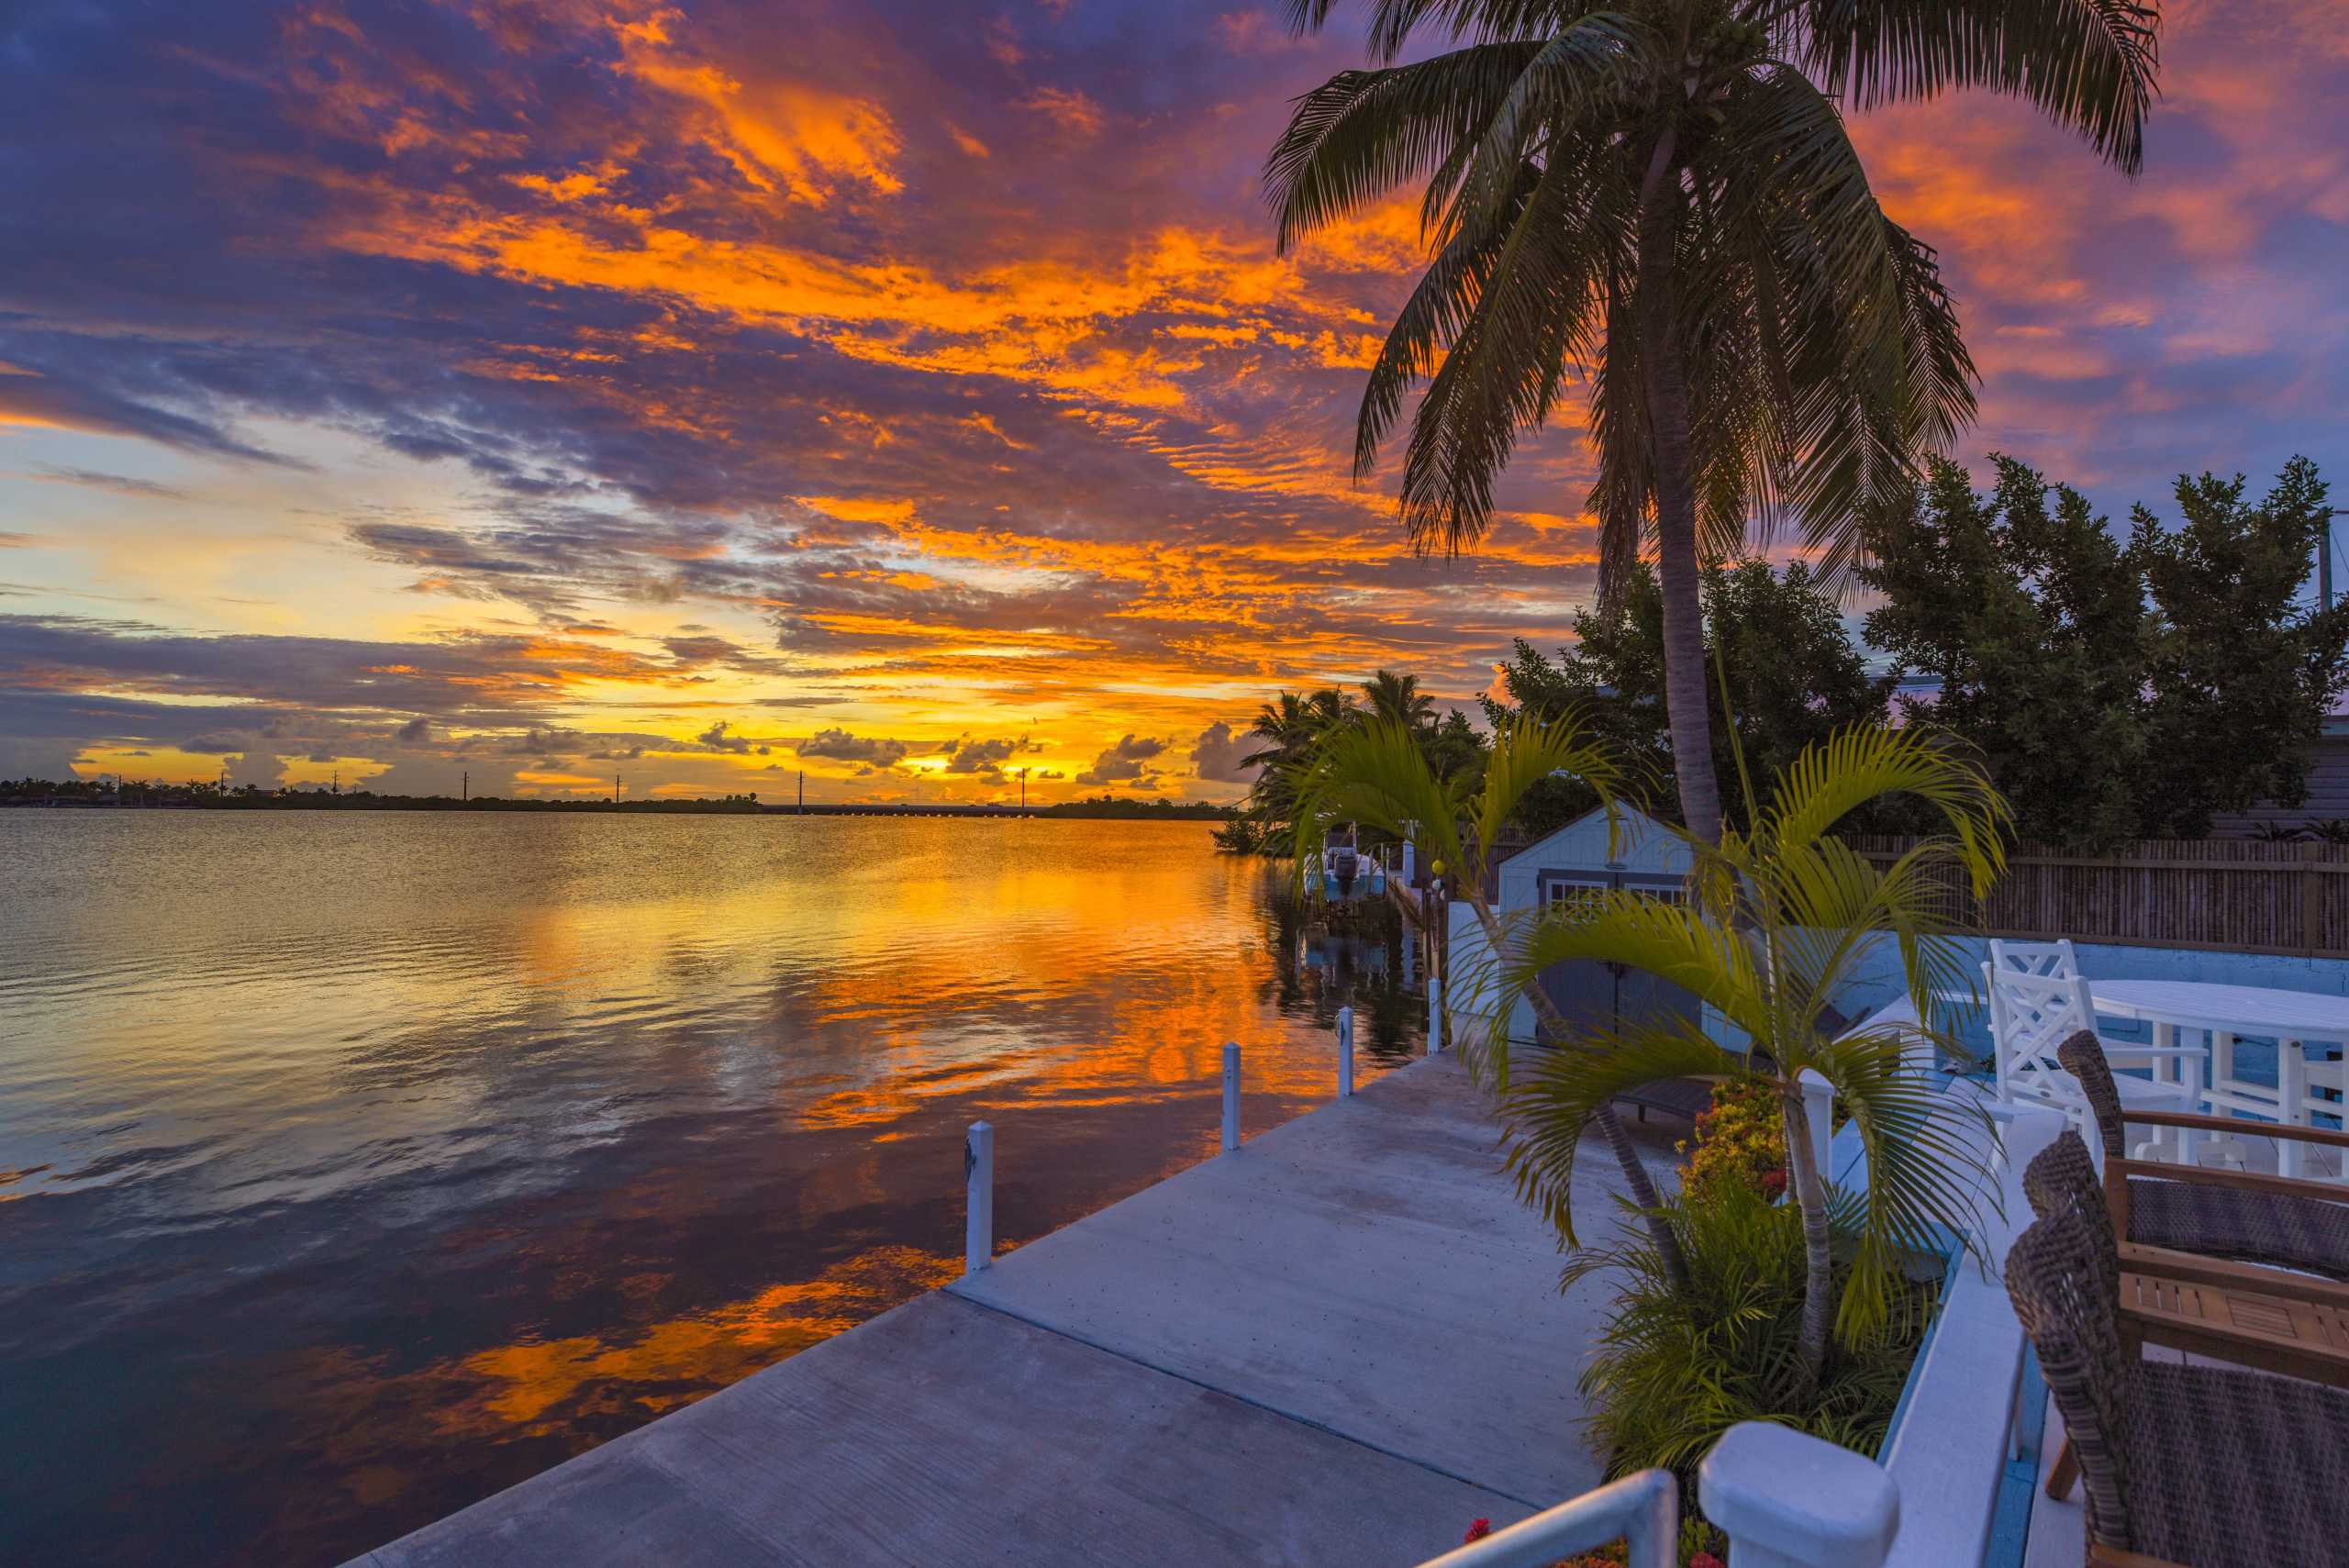 Value Priced Boater's Home Just 11 Miles form Key West